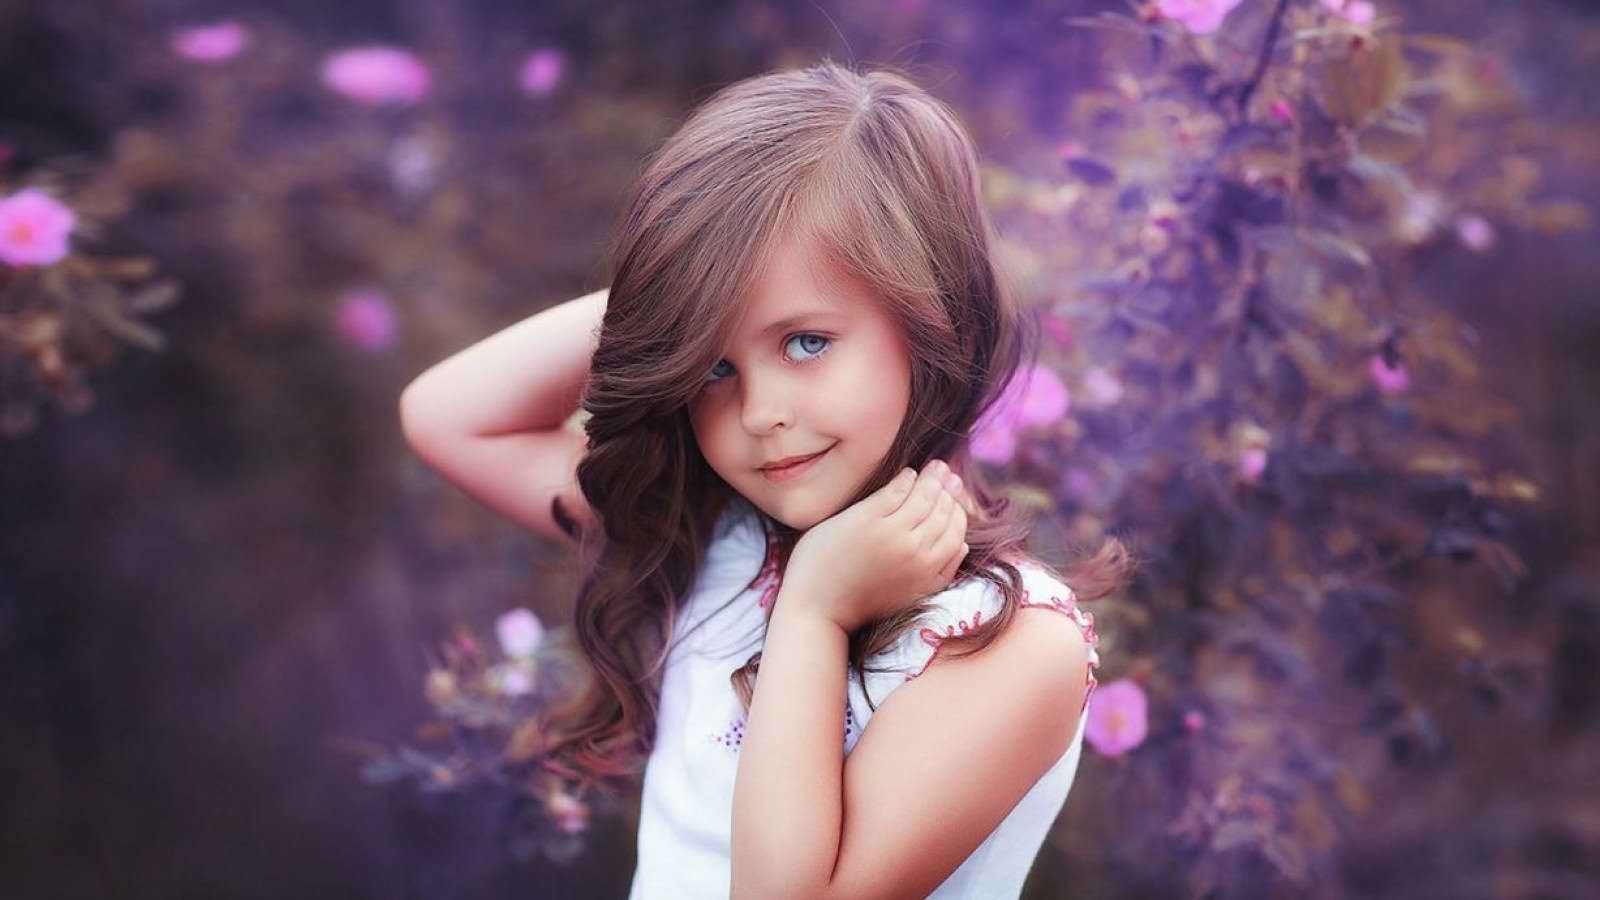 Cute Baby Girl Photoshoot Wallpapers